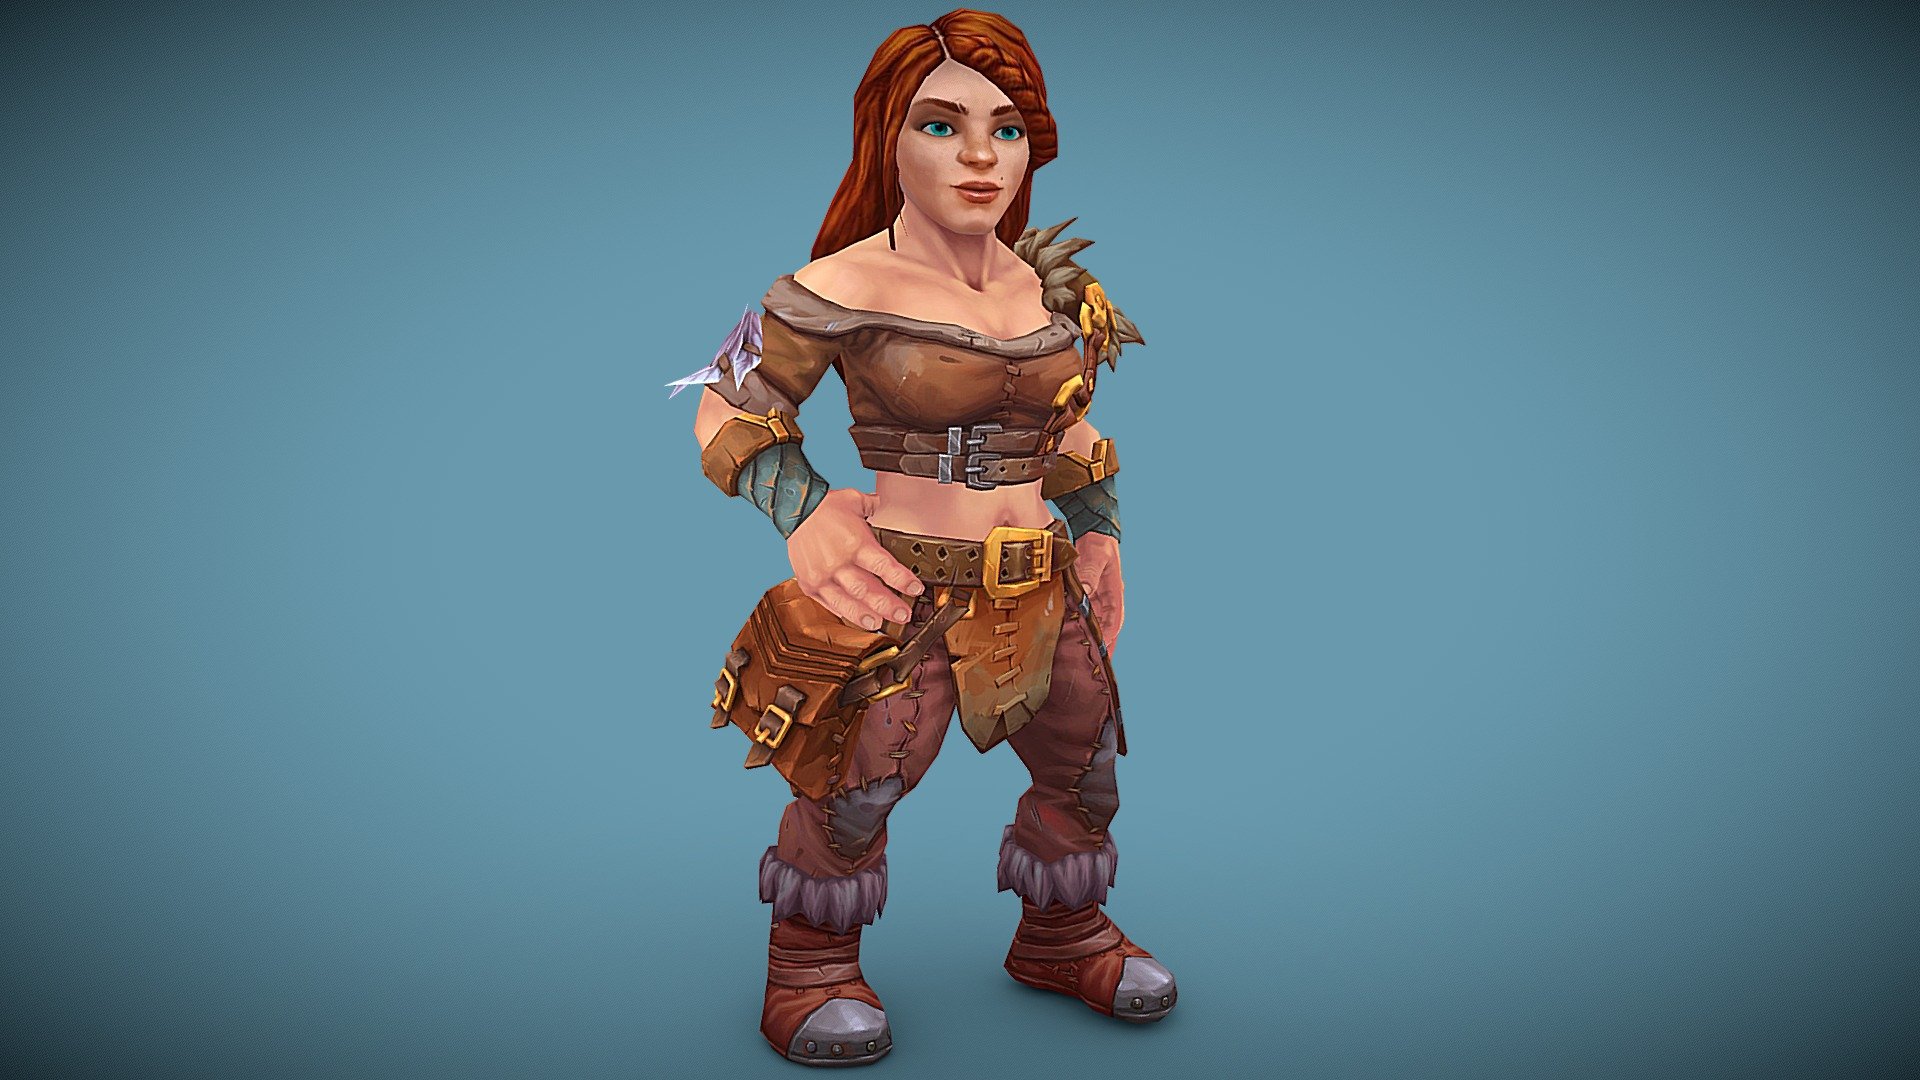 Mobile game character - Female dwarf - 3D model by androniy_pa150 3d model